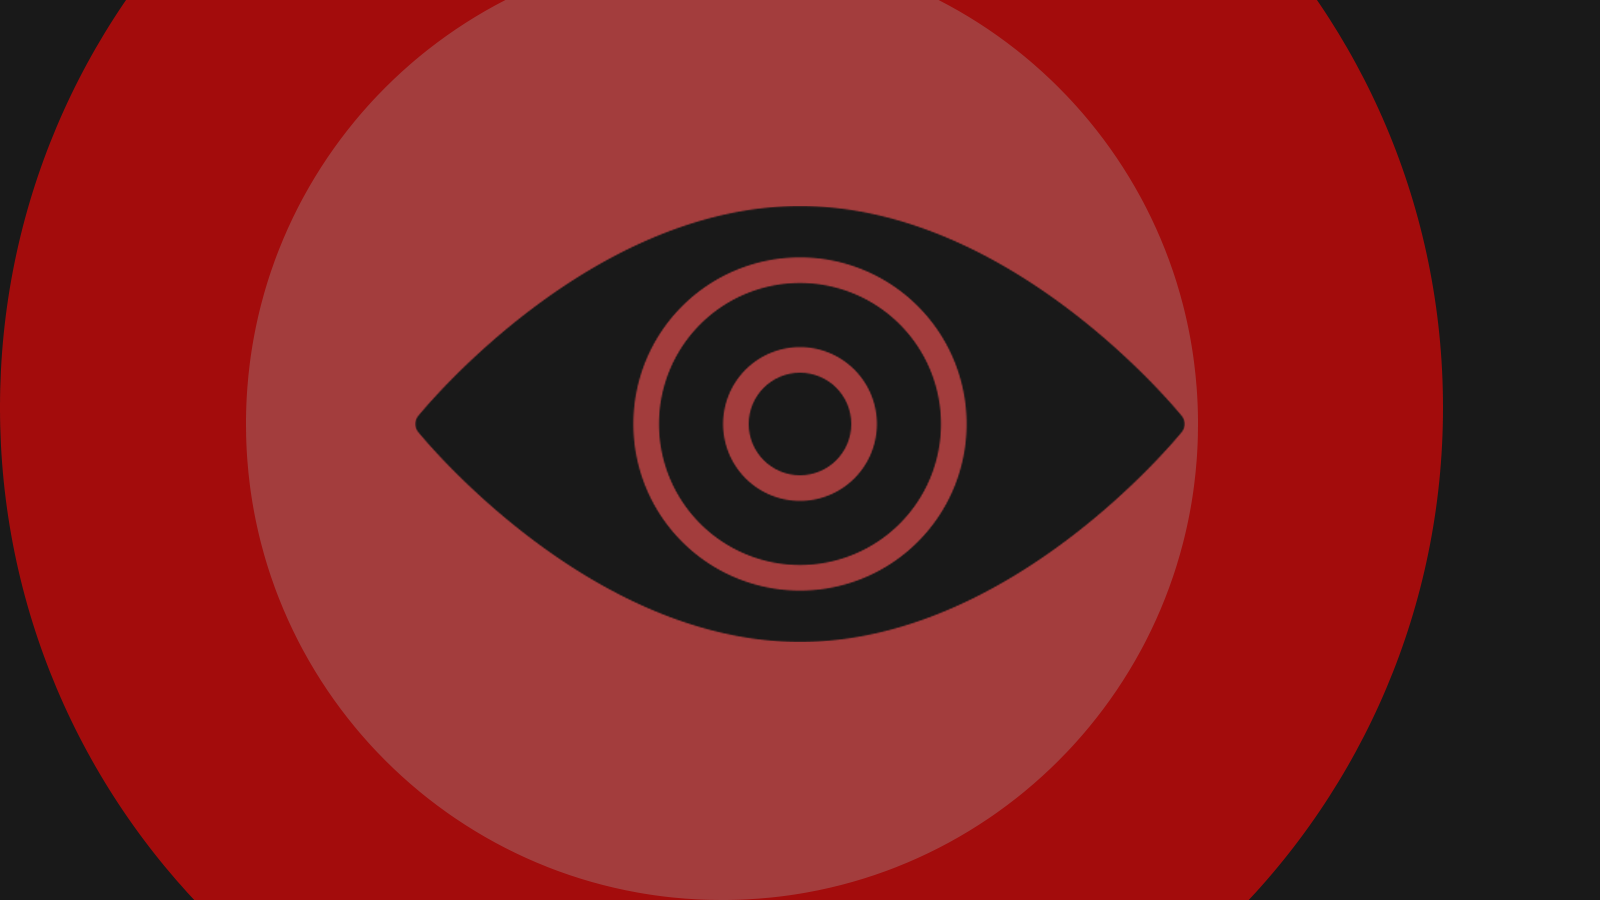 being watched - an eye icon in concentric rings